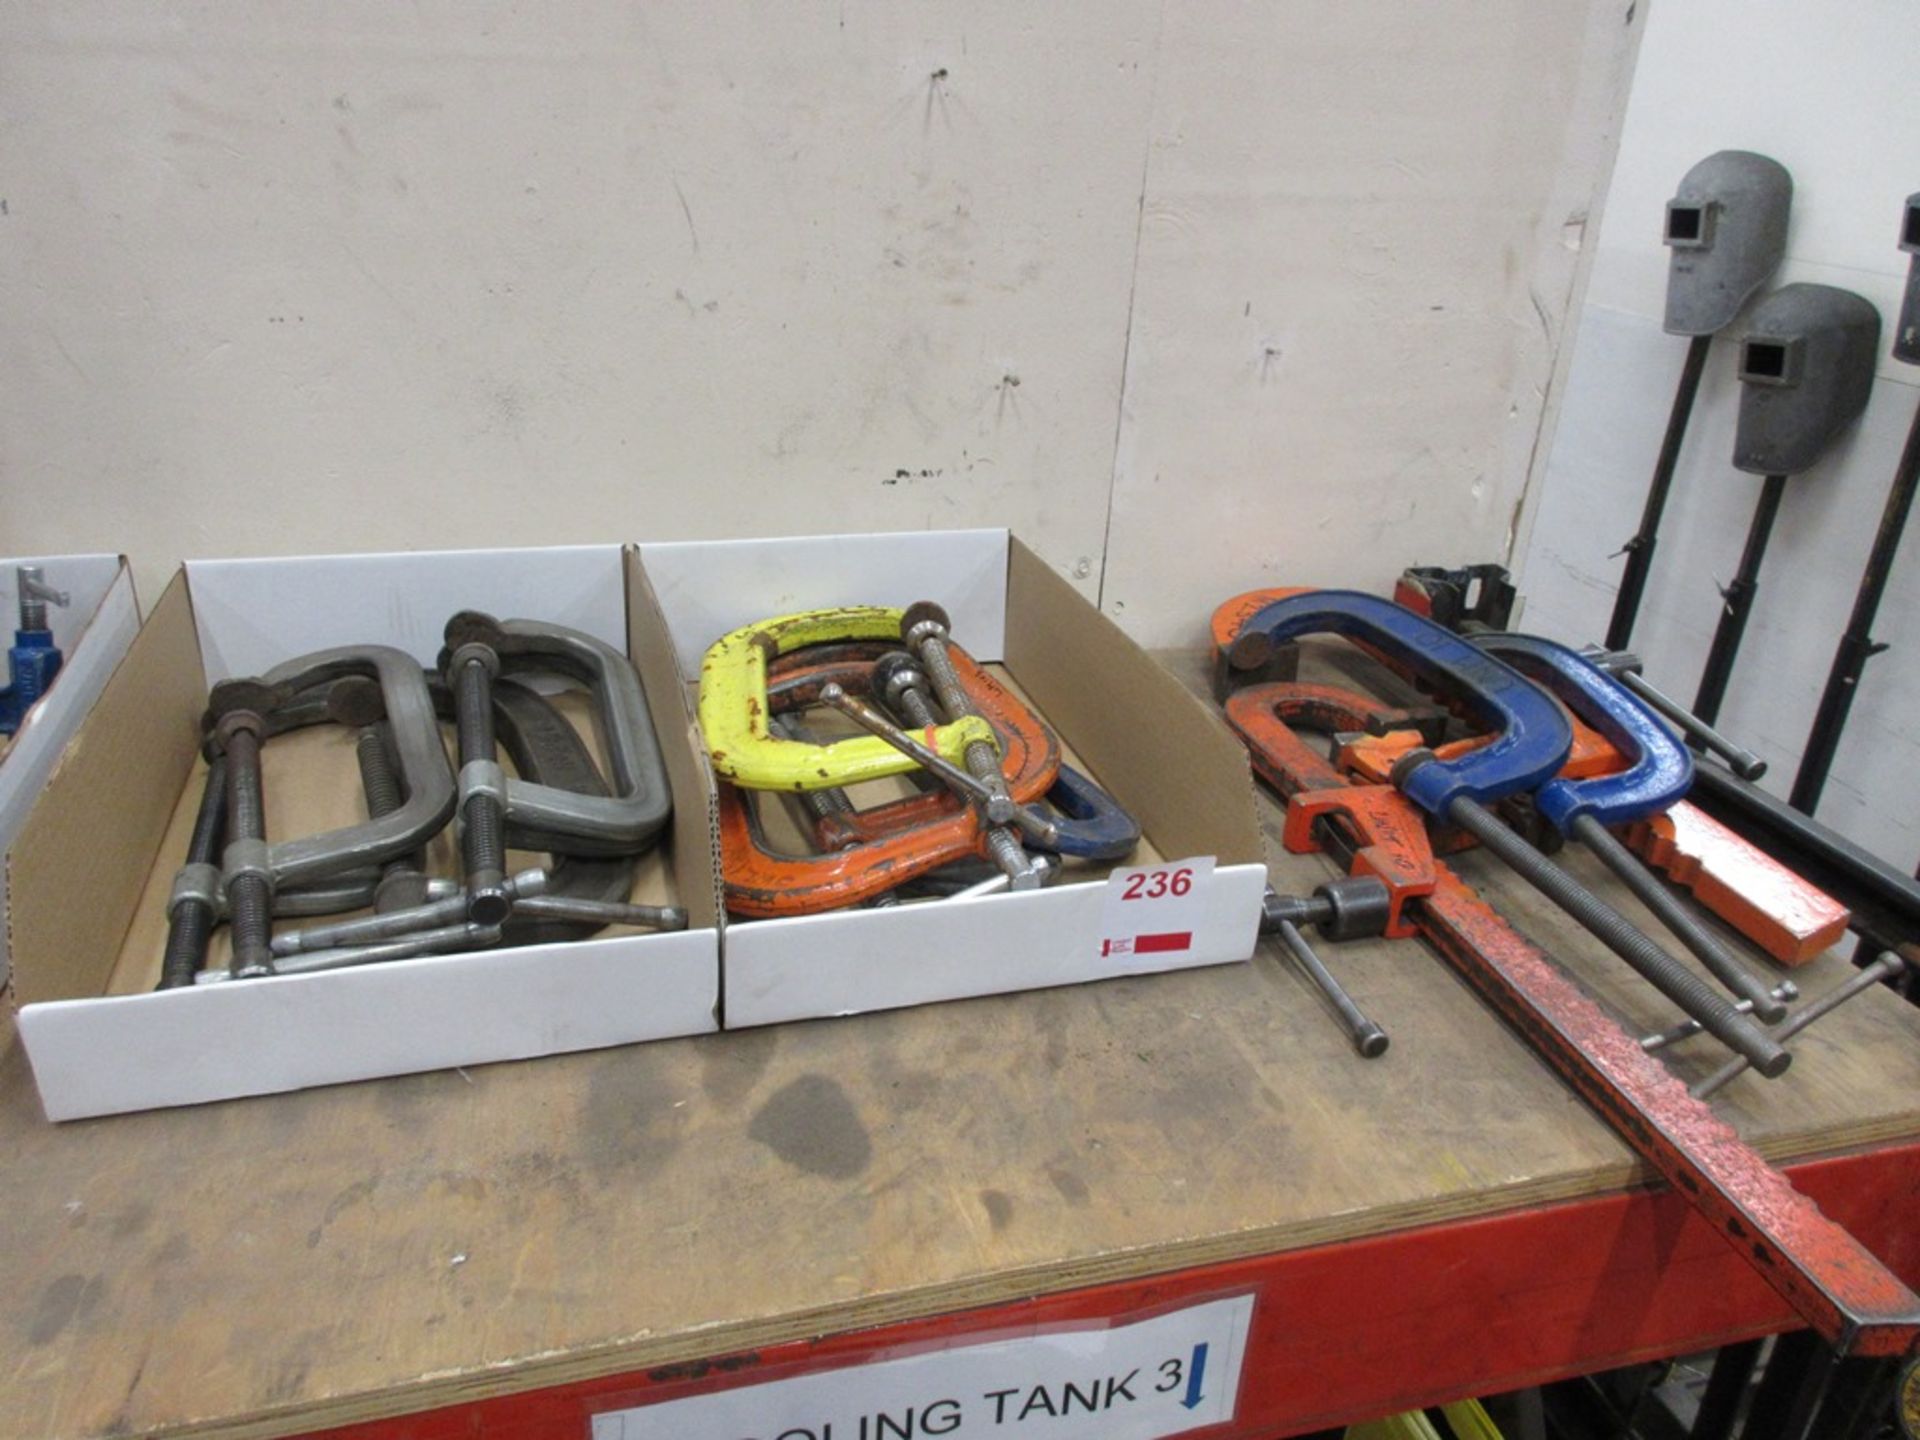 Quantity of assorted size G clamps and carver clamps